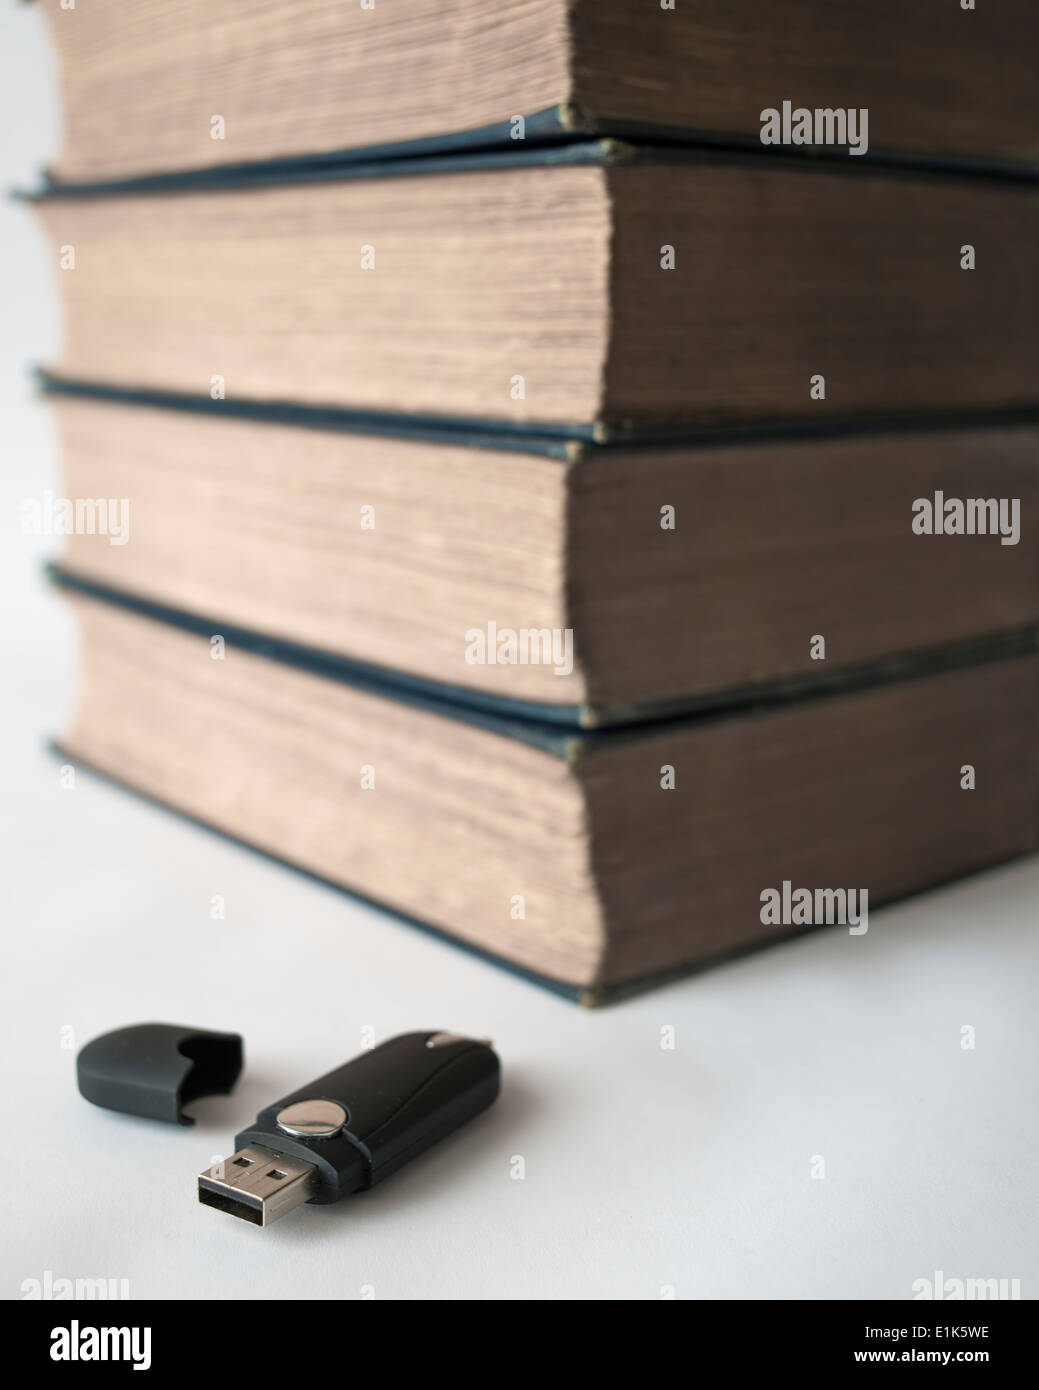 64gb USB flash drive and 100 year old books (each book of around 600 pages is equivalent to less than 1 megabyte so the drive Stock Photo